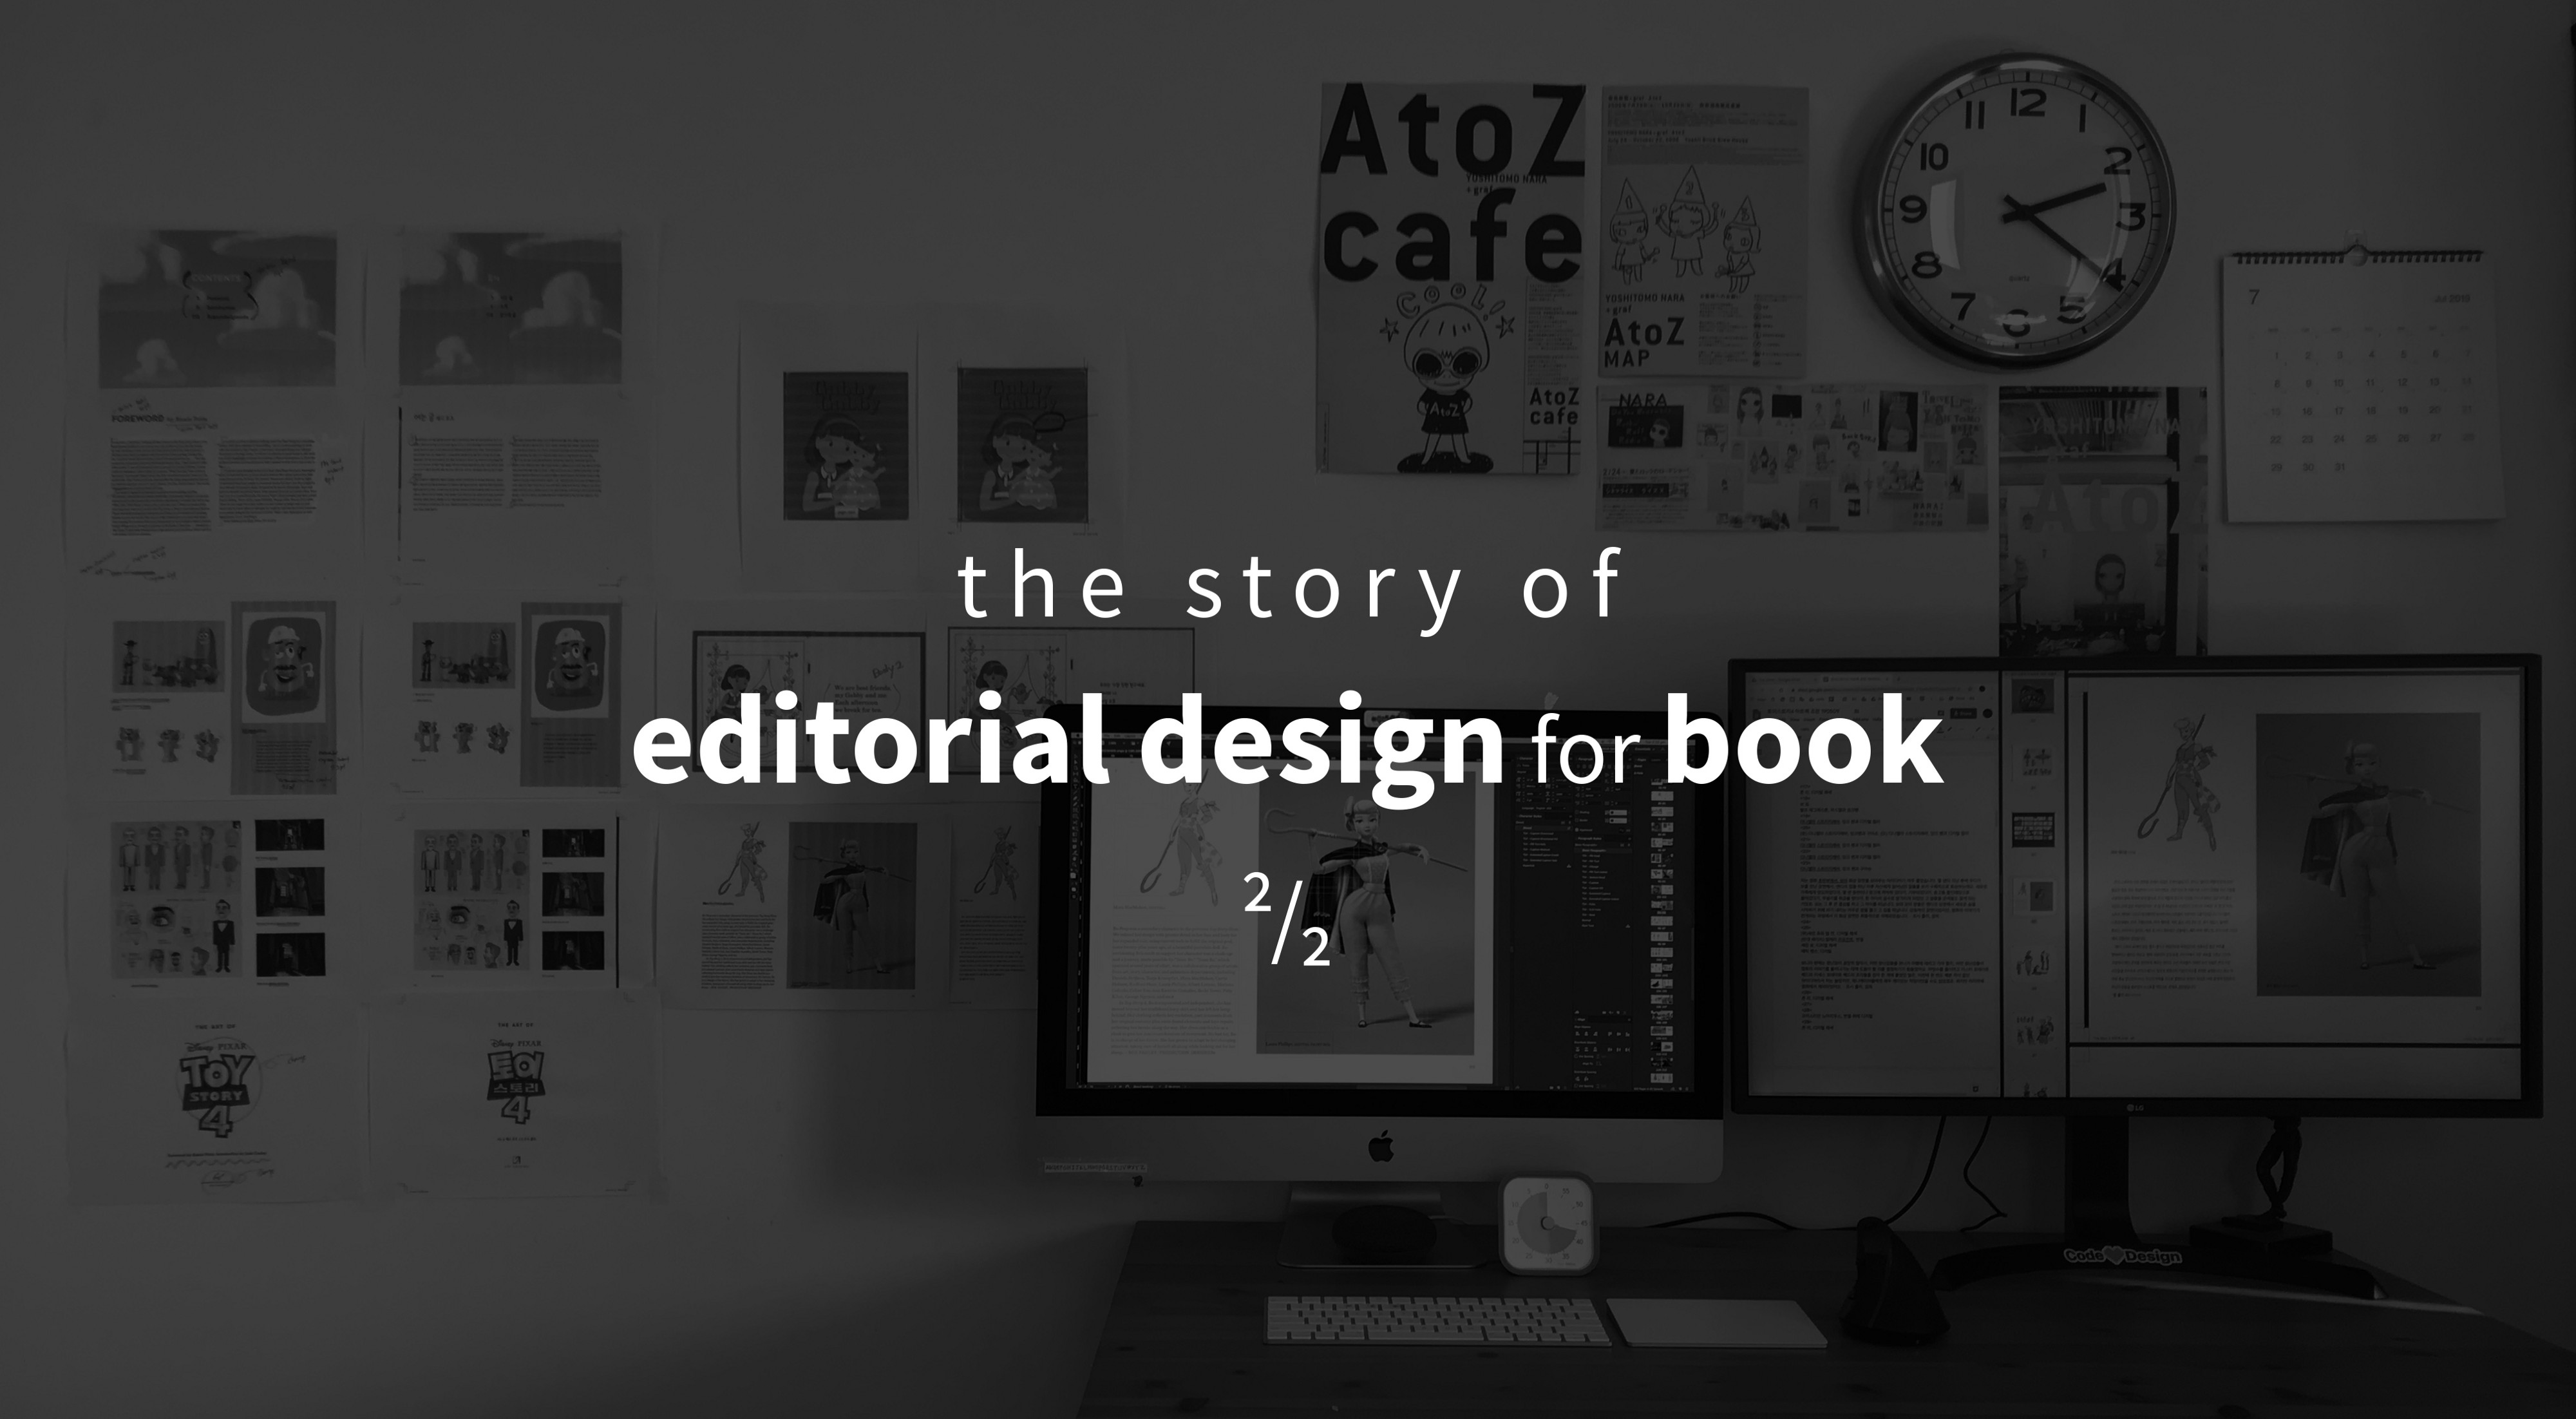 The story of editorial design for book ²/₂: The Art of Toy Story 4